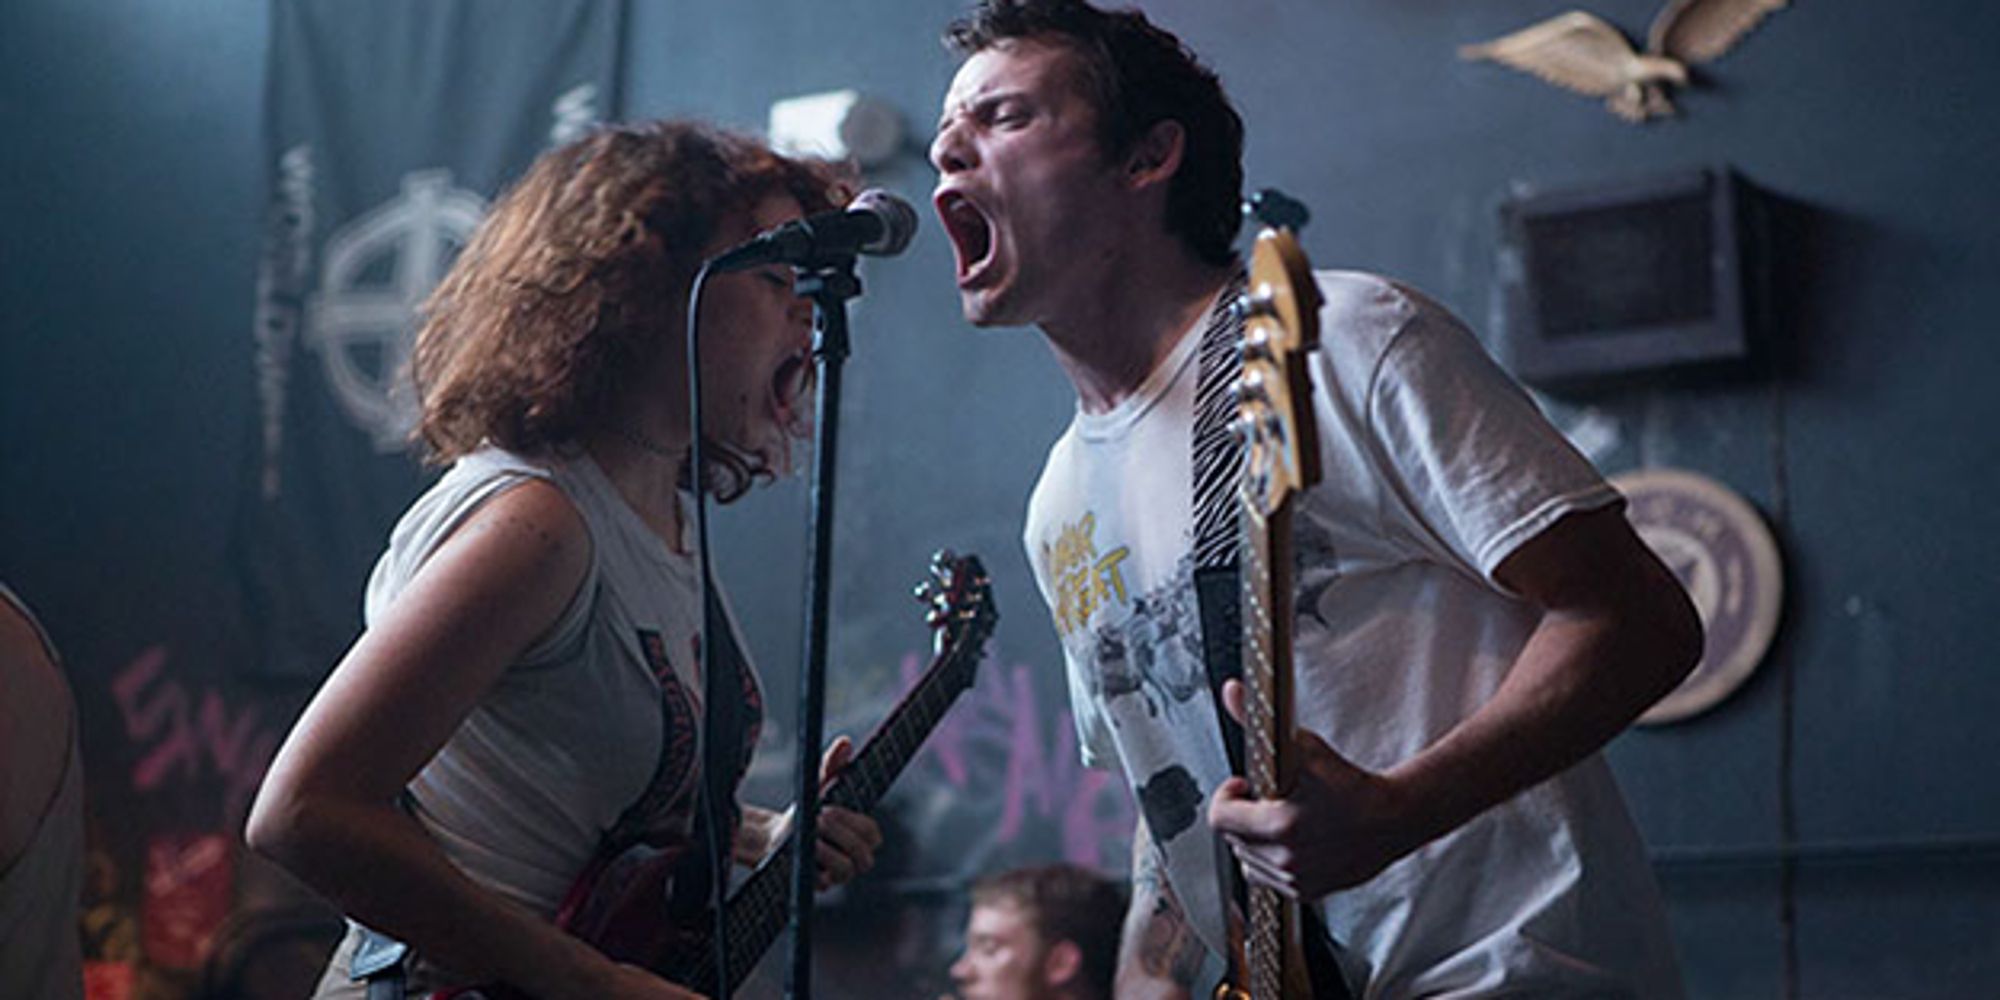 Alia Shawkat and Anton Yelchin perform as part of their punk band in the film Green Room